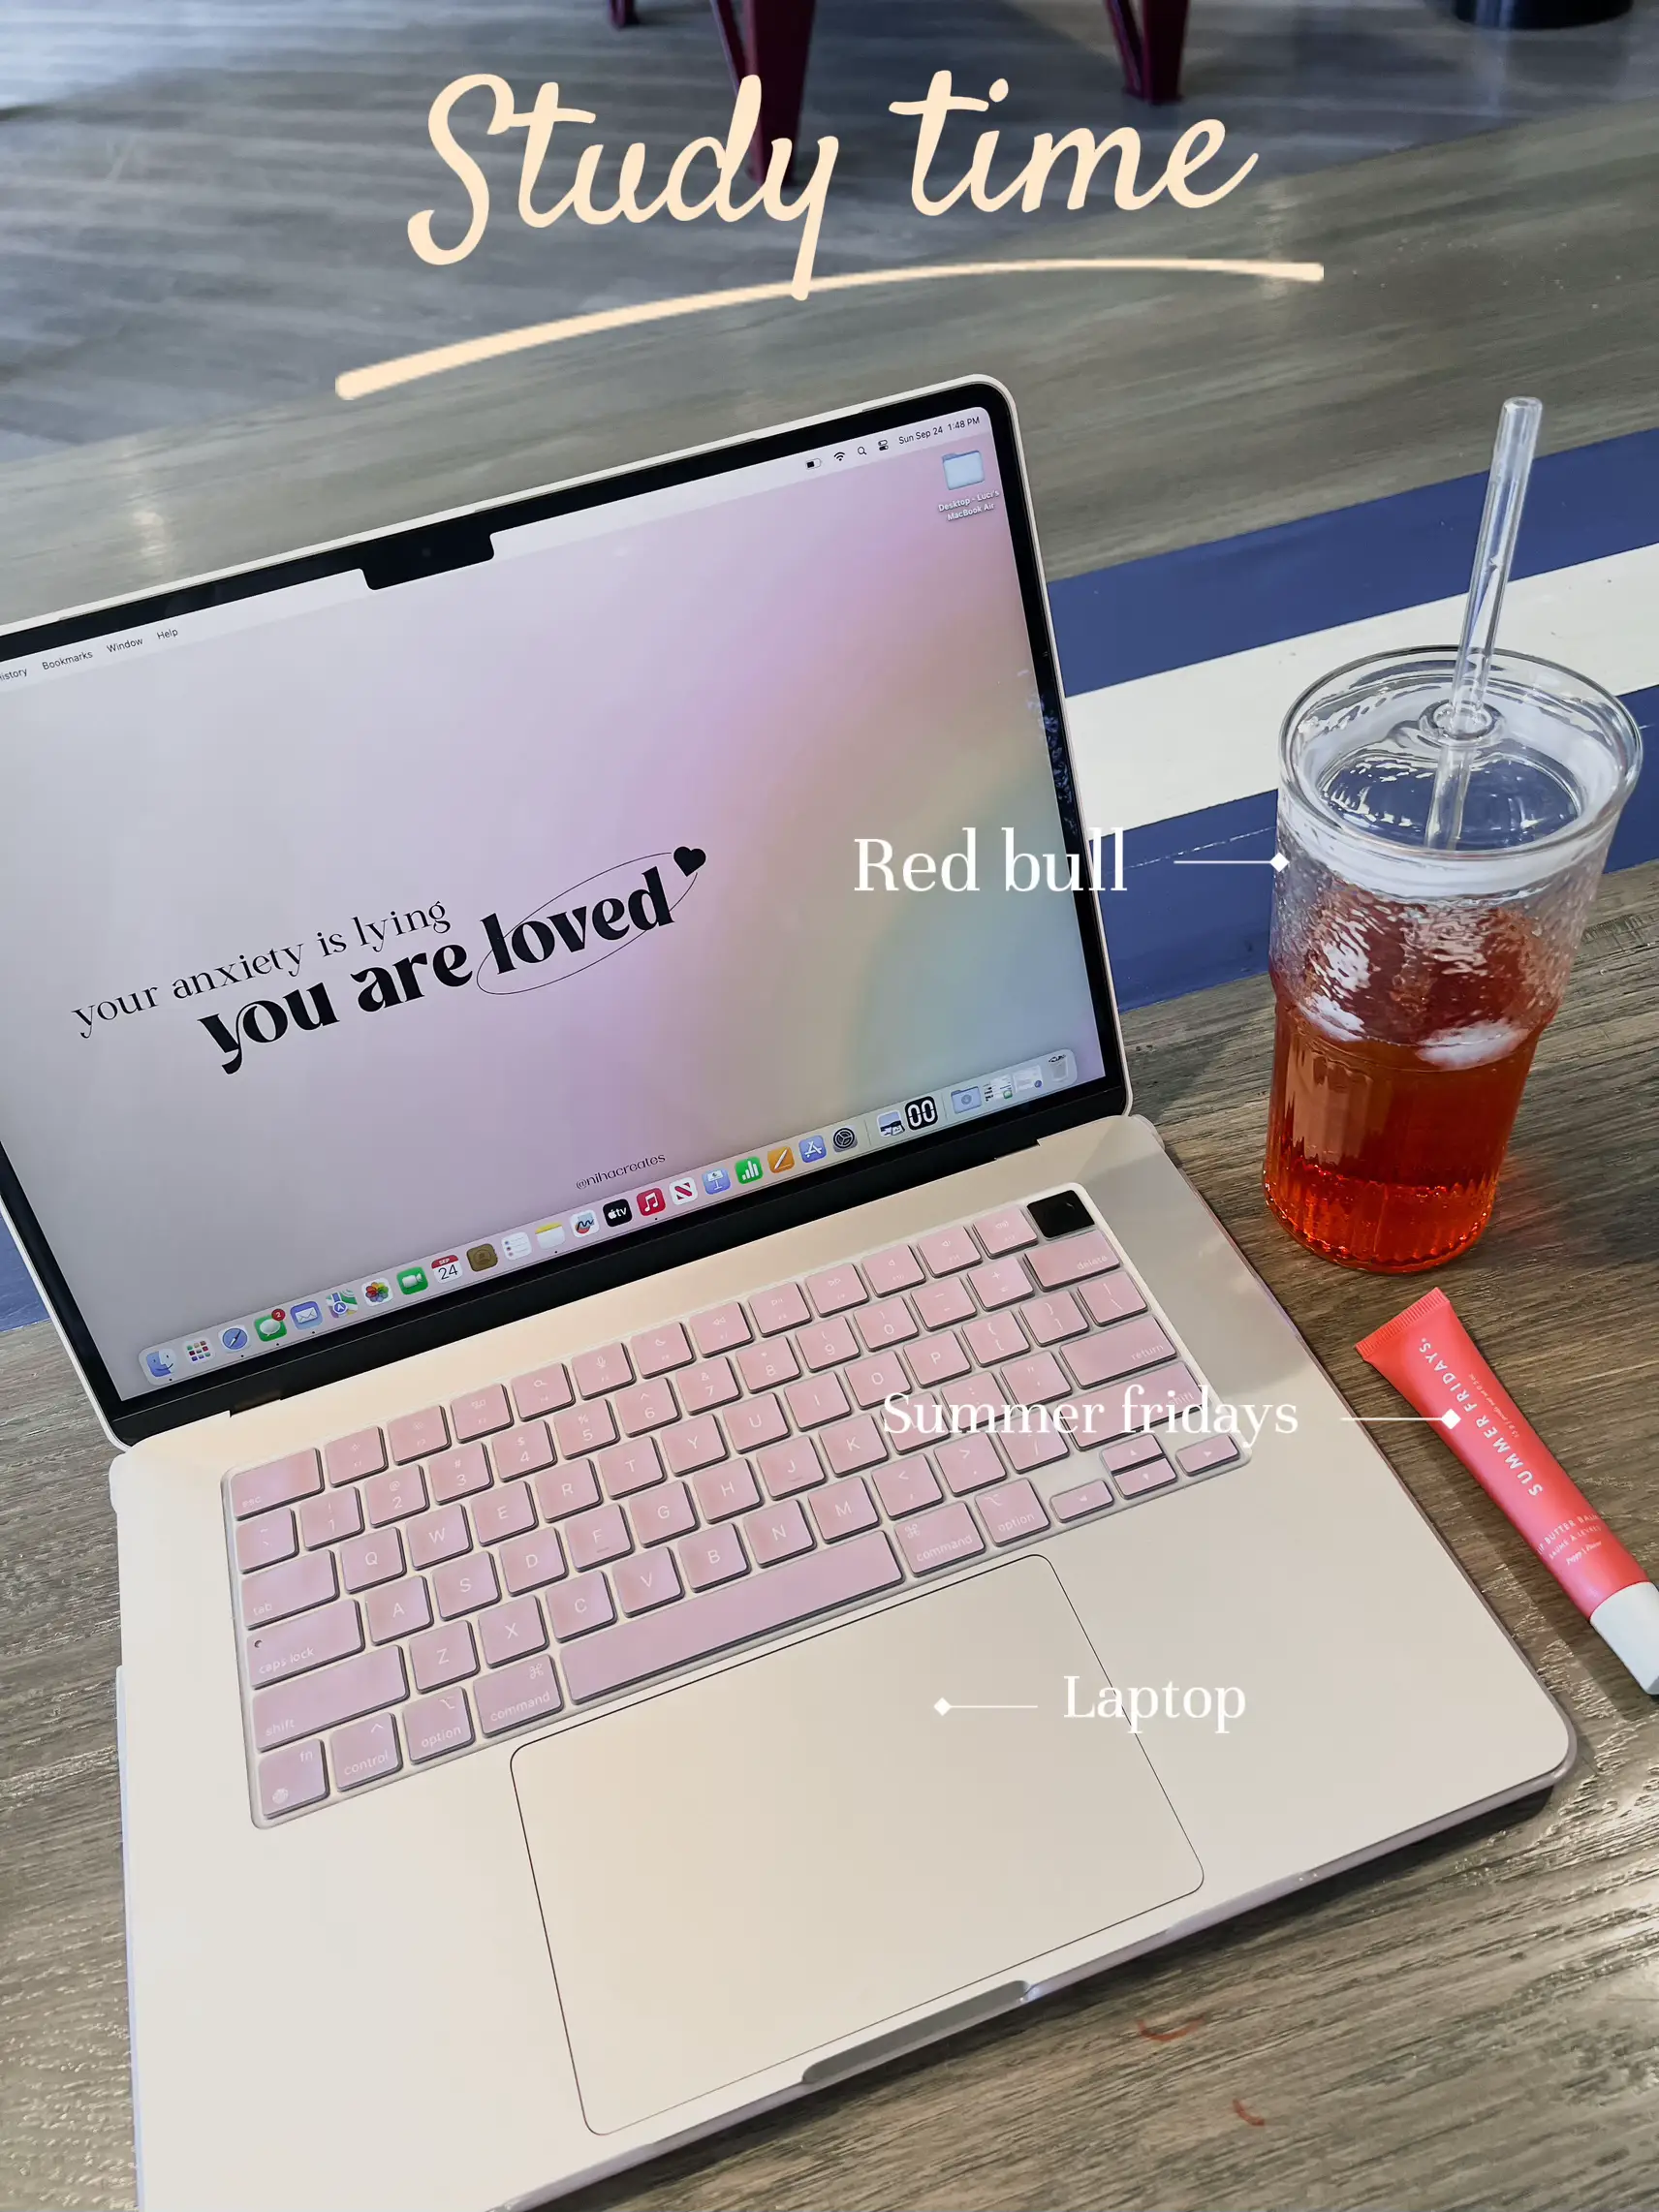  A laptop is open on a table with a cup